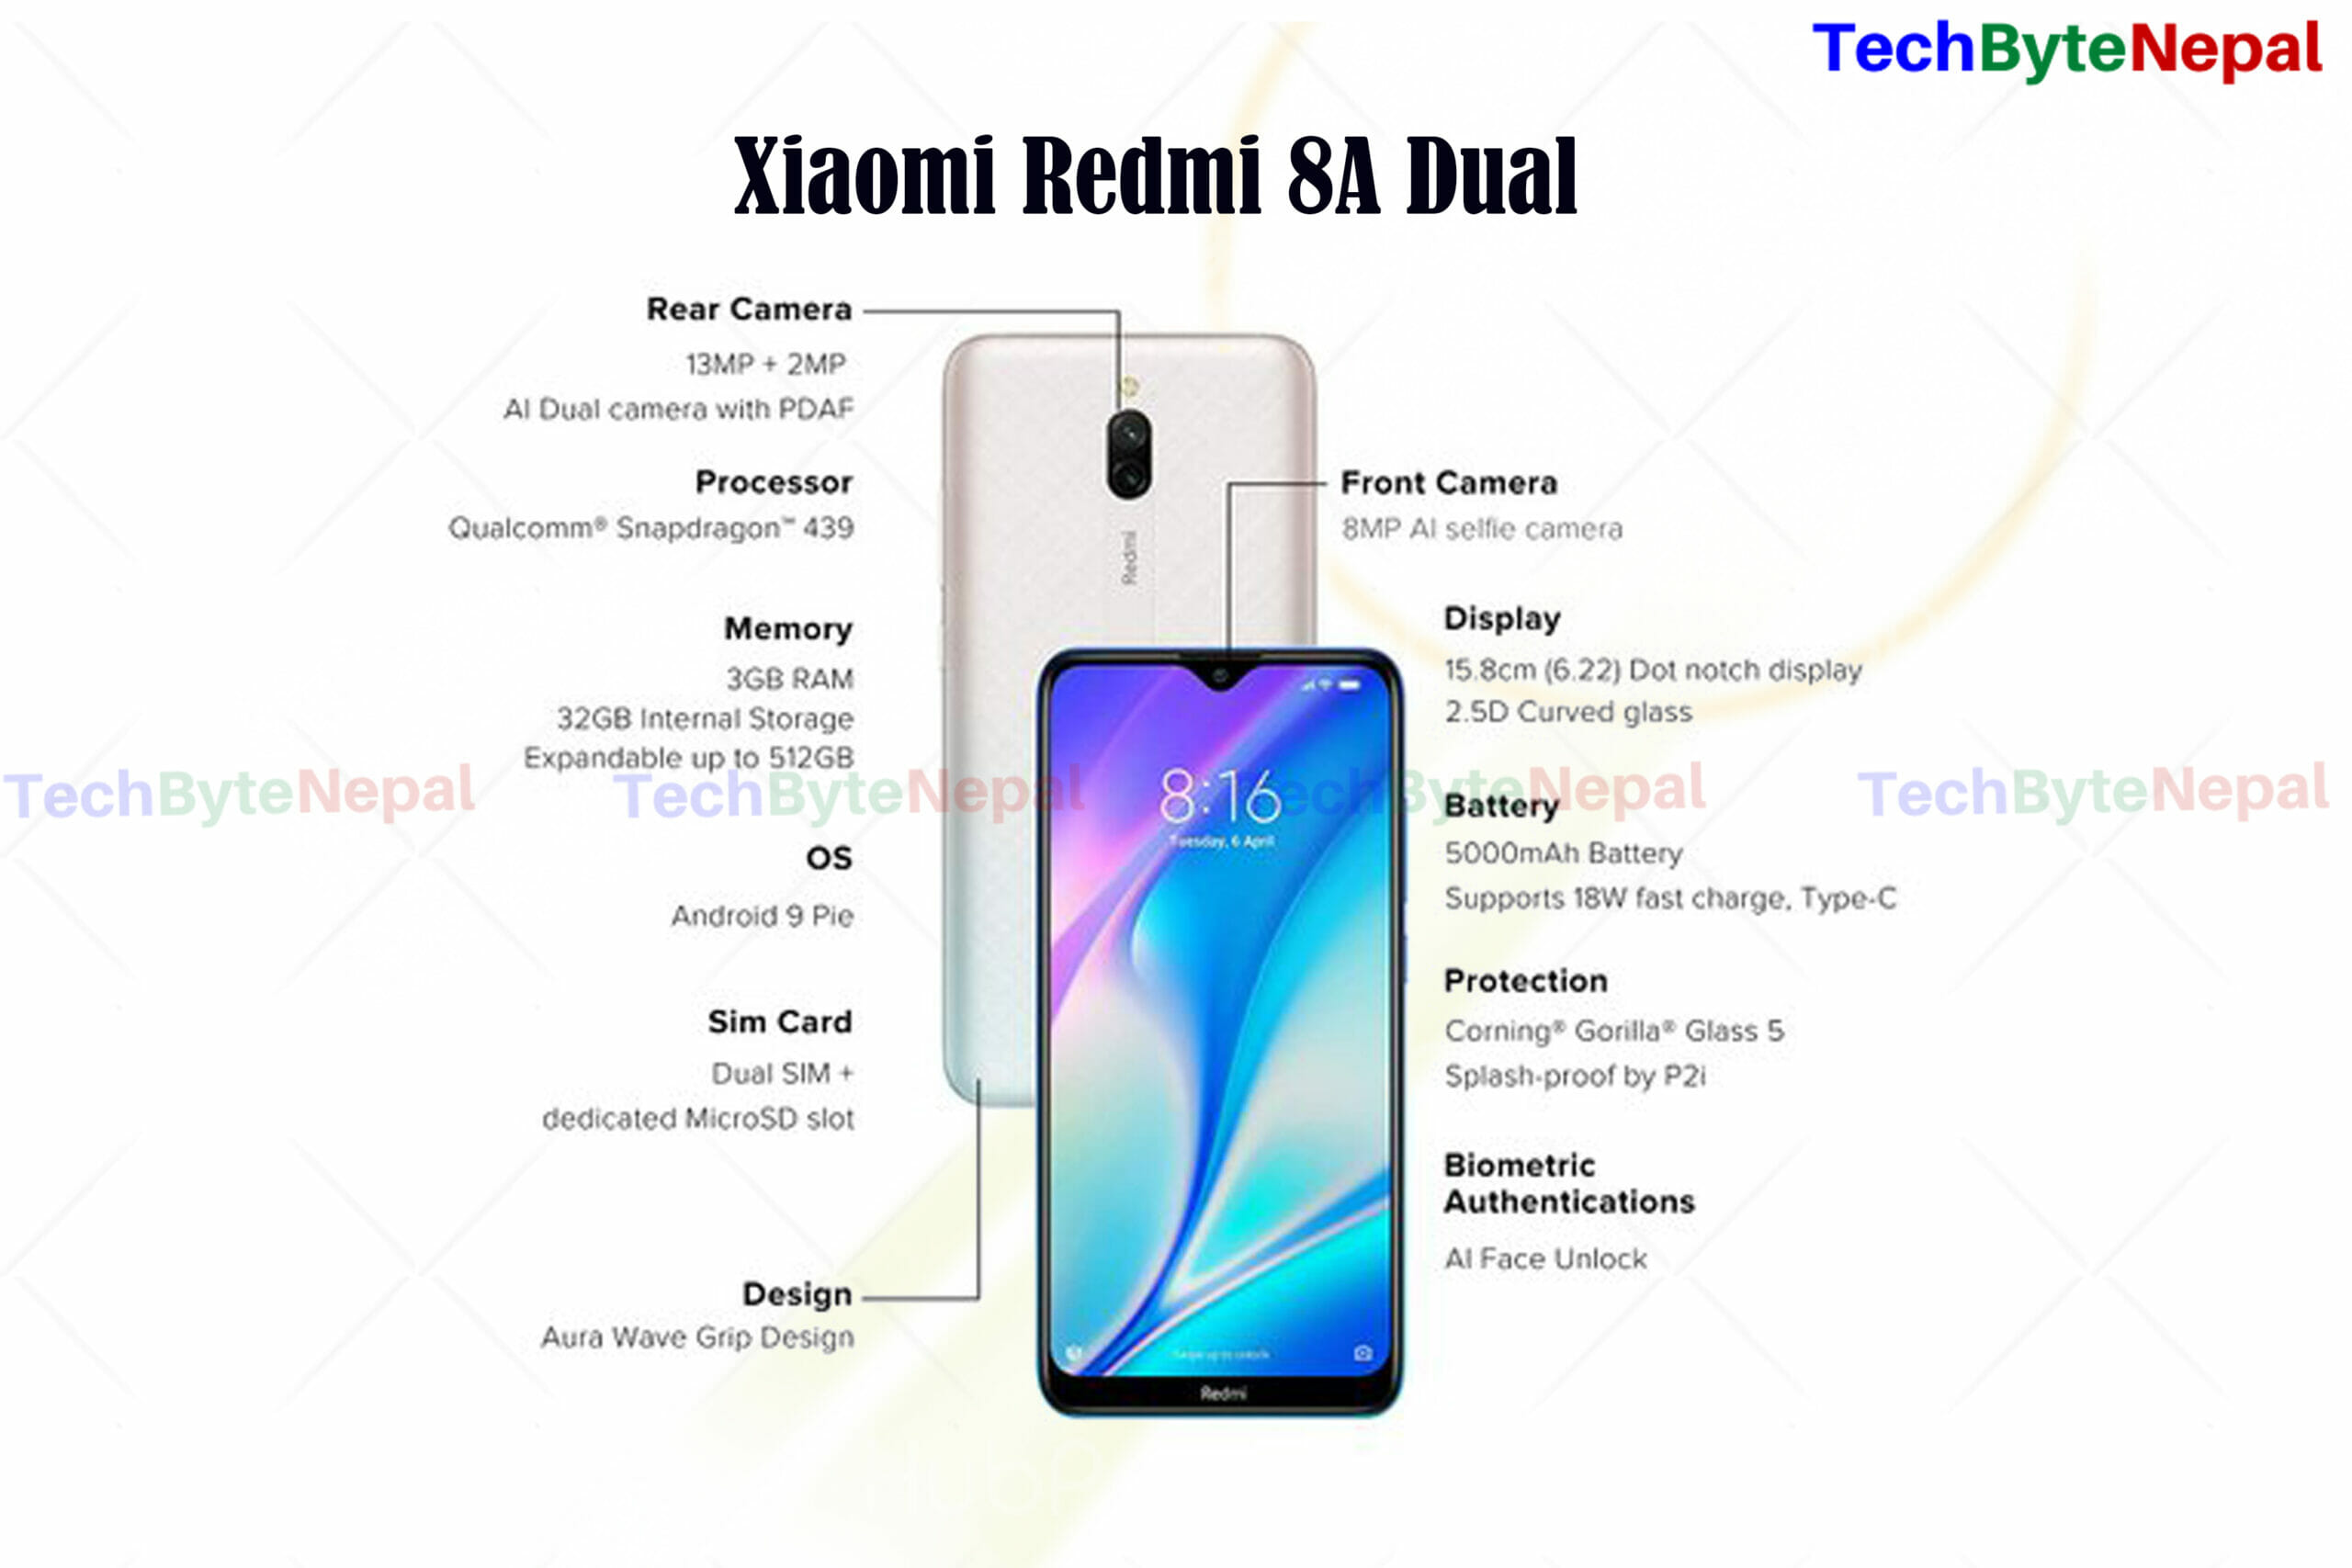 Redmi 8a Dual Specification and Features